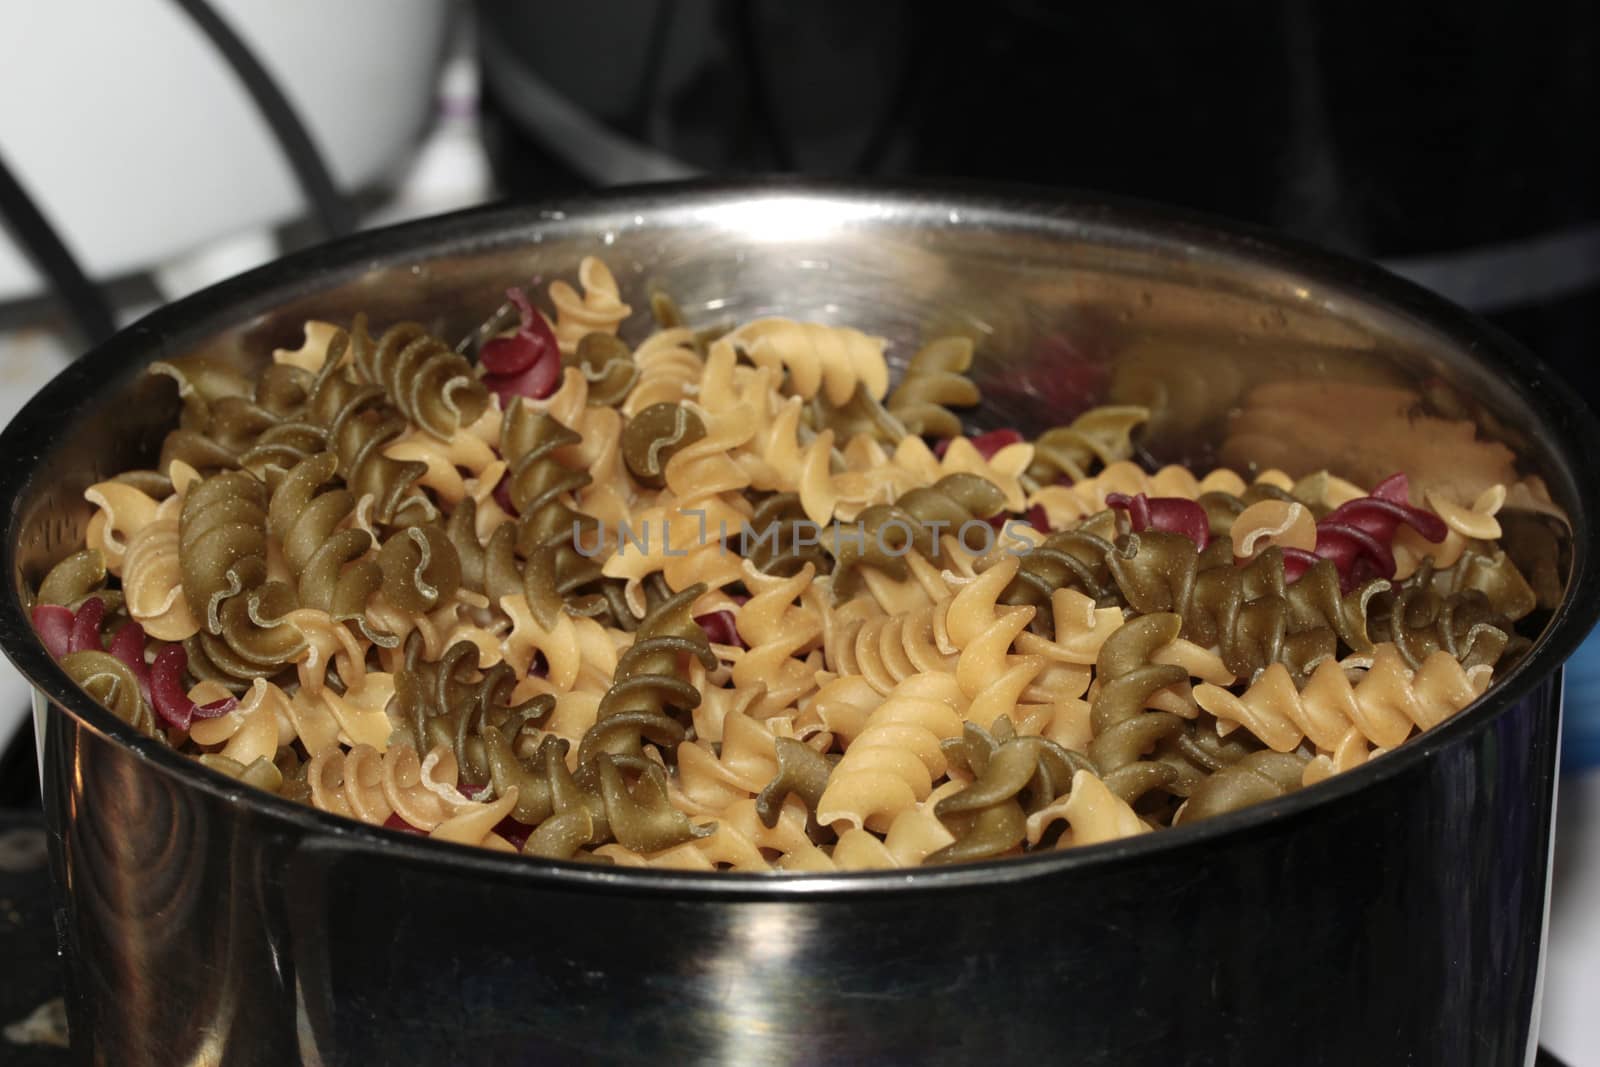 Spiral pasta cooking in a pot